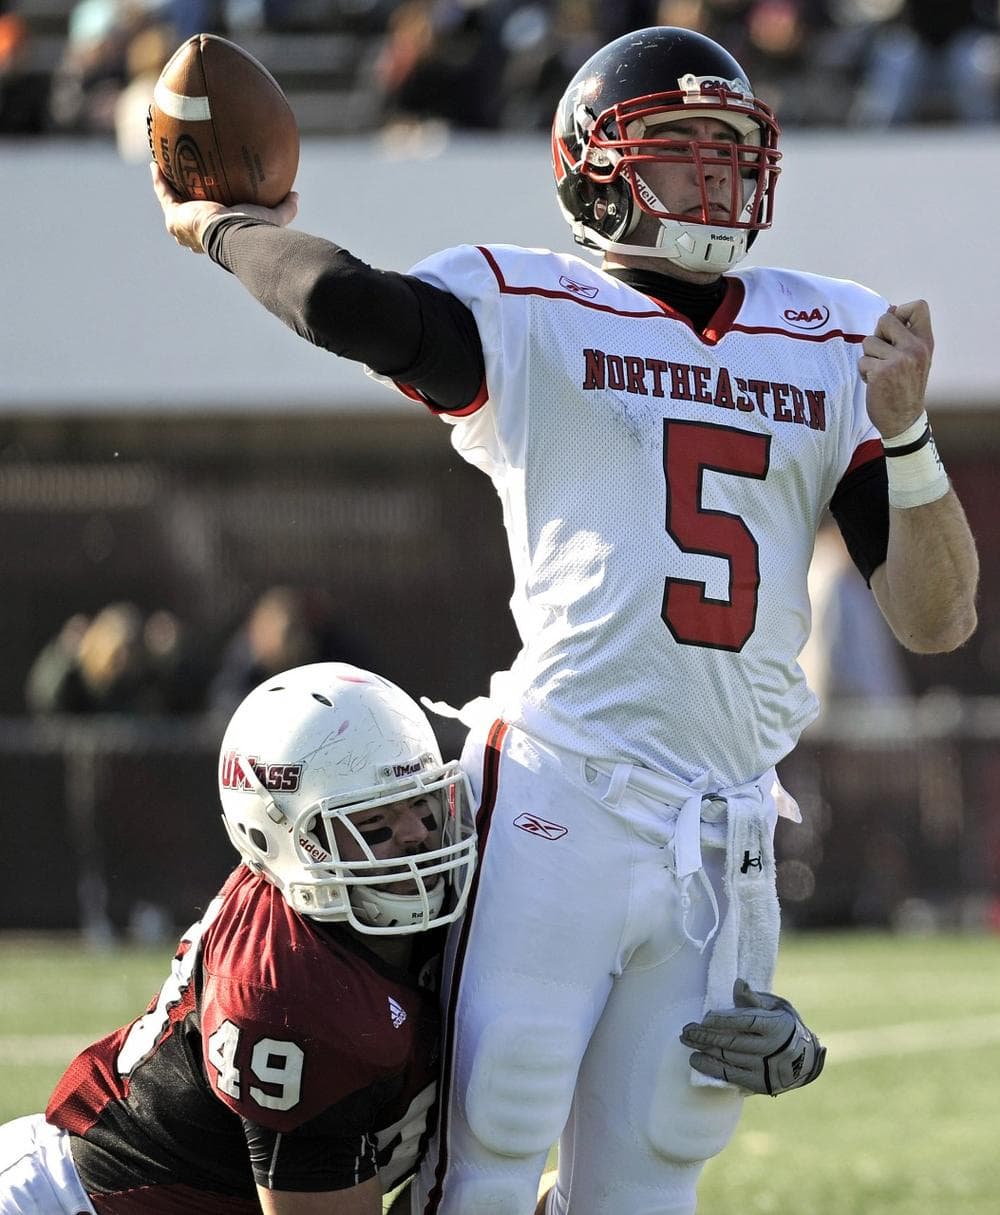 Northeastern quarterback Alex Dulski is sacked during the first half of an NCAA game earlier this month. Northeastern is dropping its football program after 74 years, saying it's too expensive to maintain. (AP) 